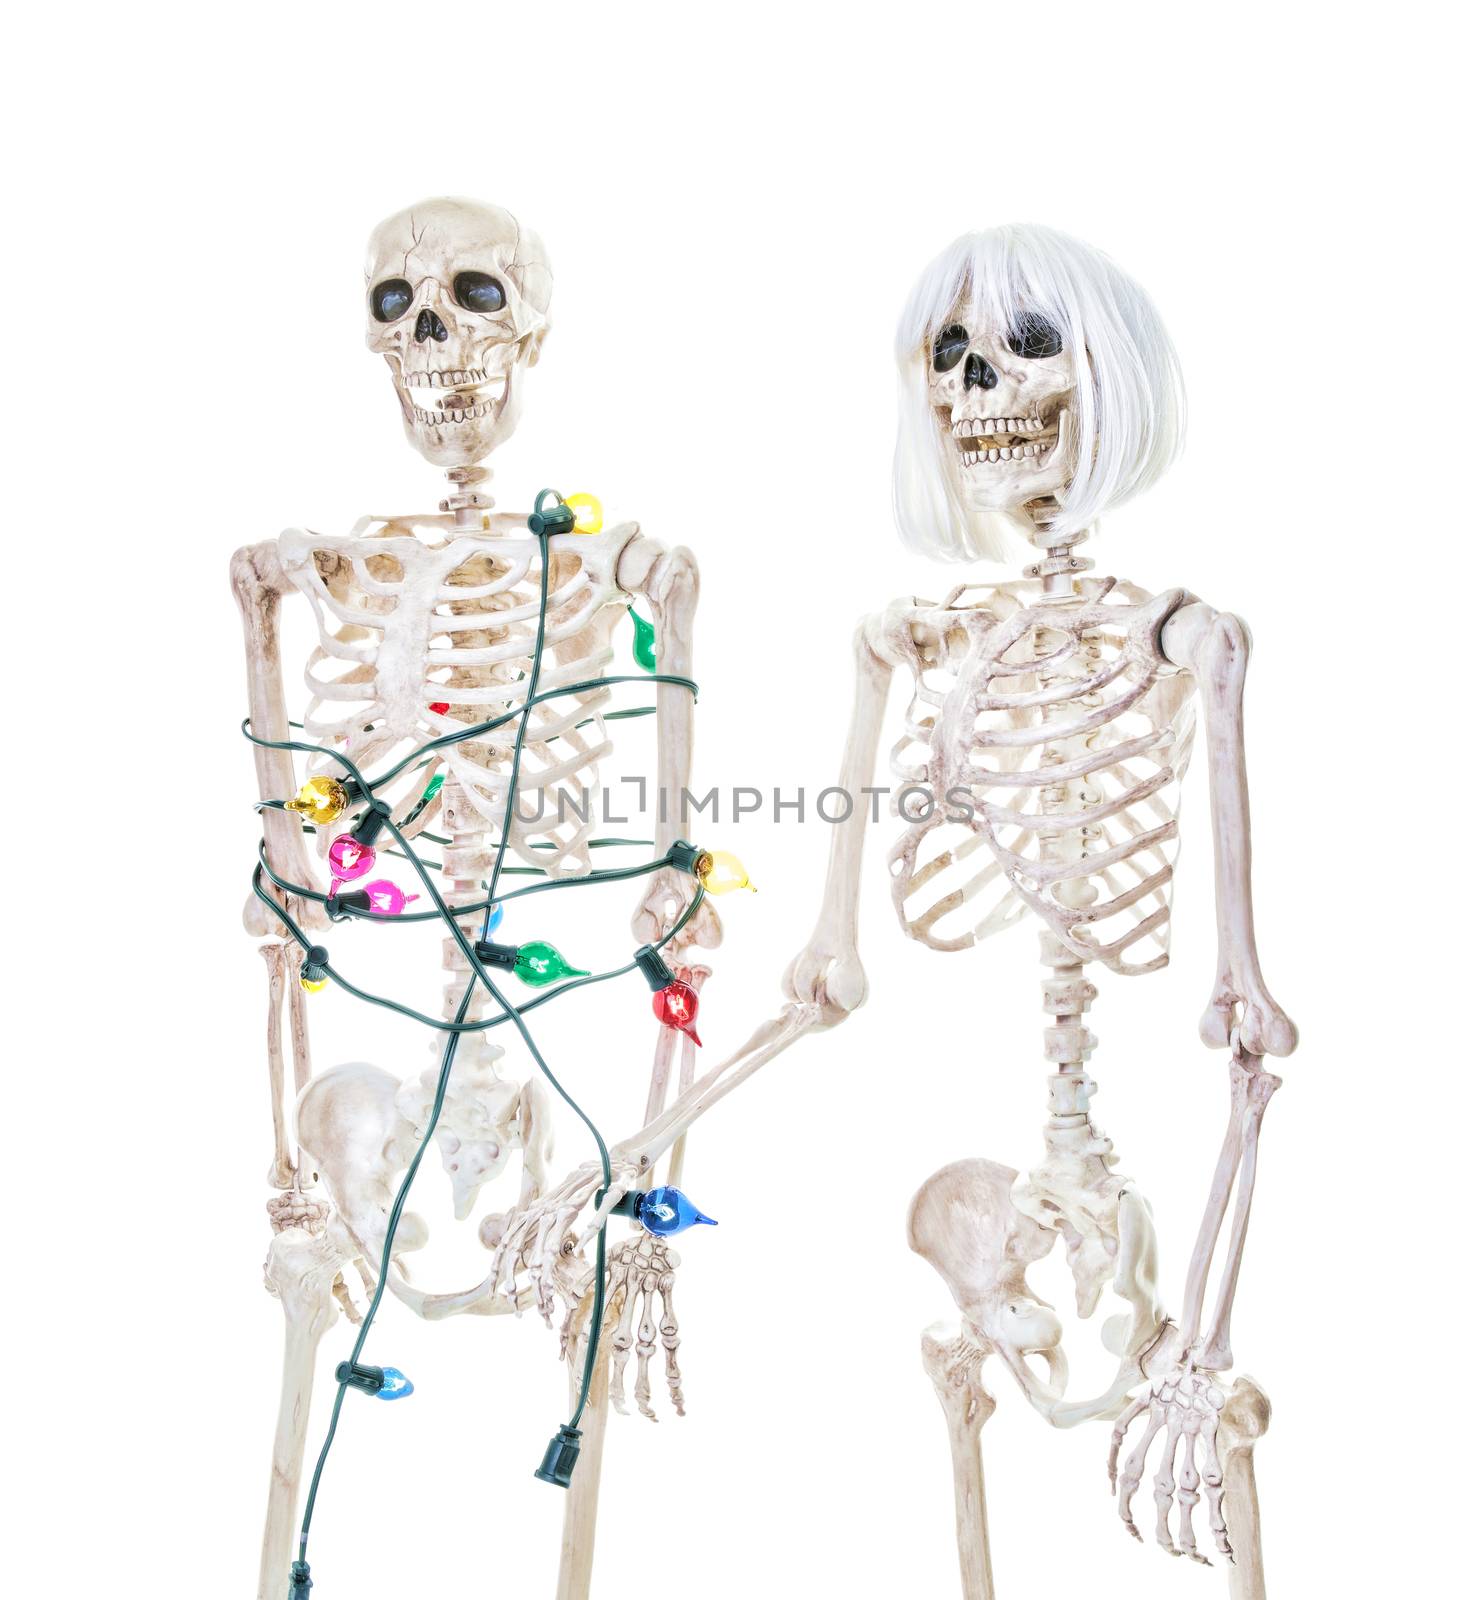 A male skeleton tied up with christmas lights and a female skeleton holding the end.